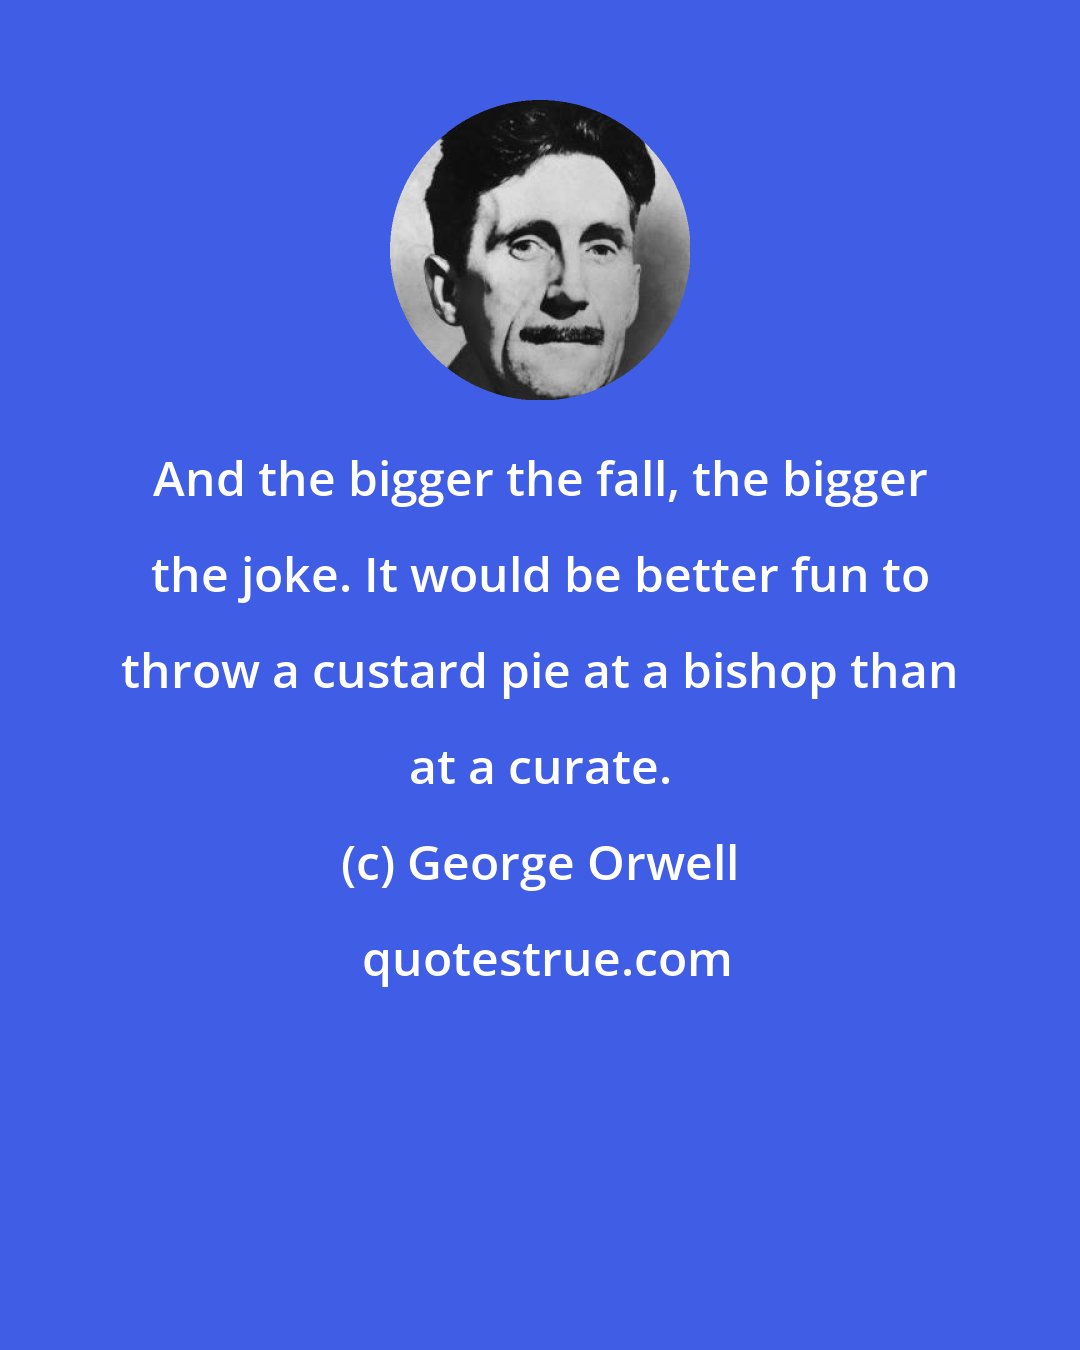 George Orwell: And the bigger the fall, the bigger the joke. It would be better fun to throw a custard pie at a bishop than at a curate.